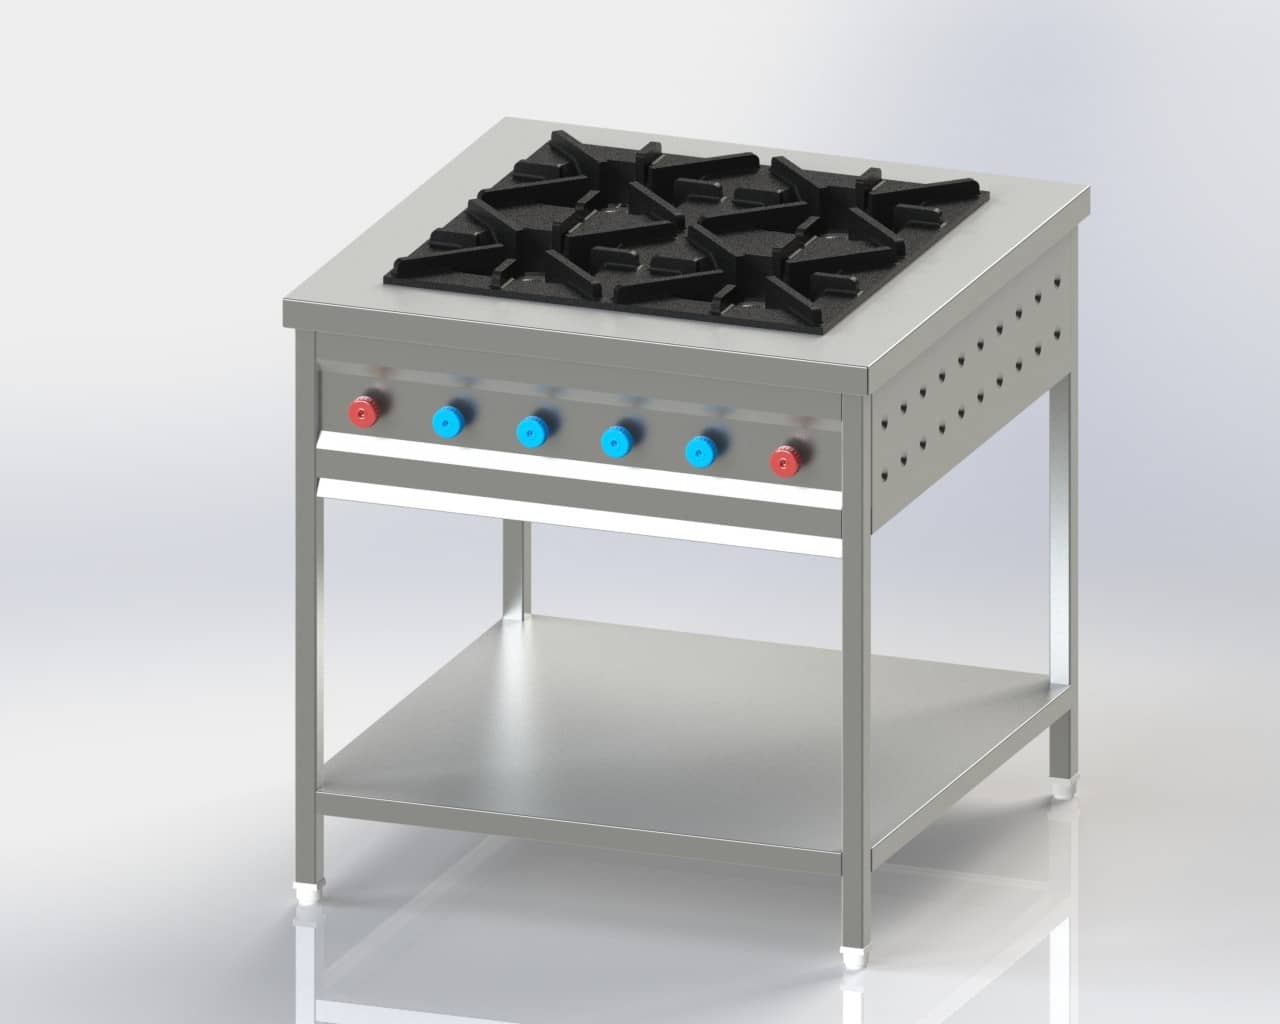 Four Burner without oven for cooking in commercial kitchen